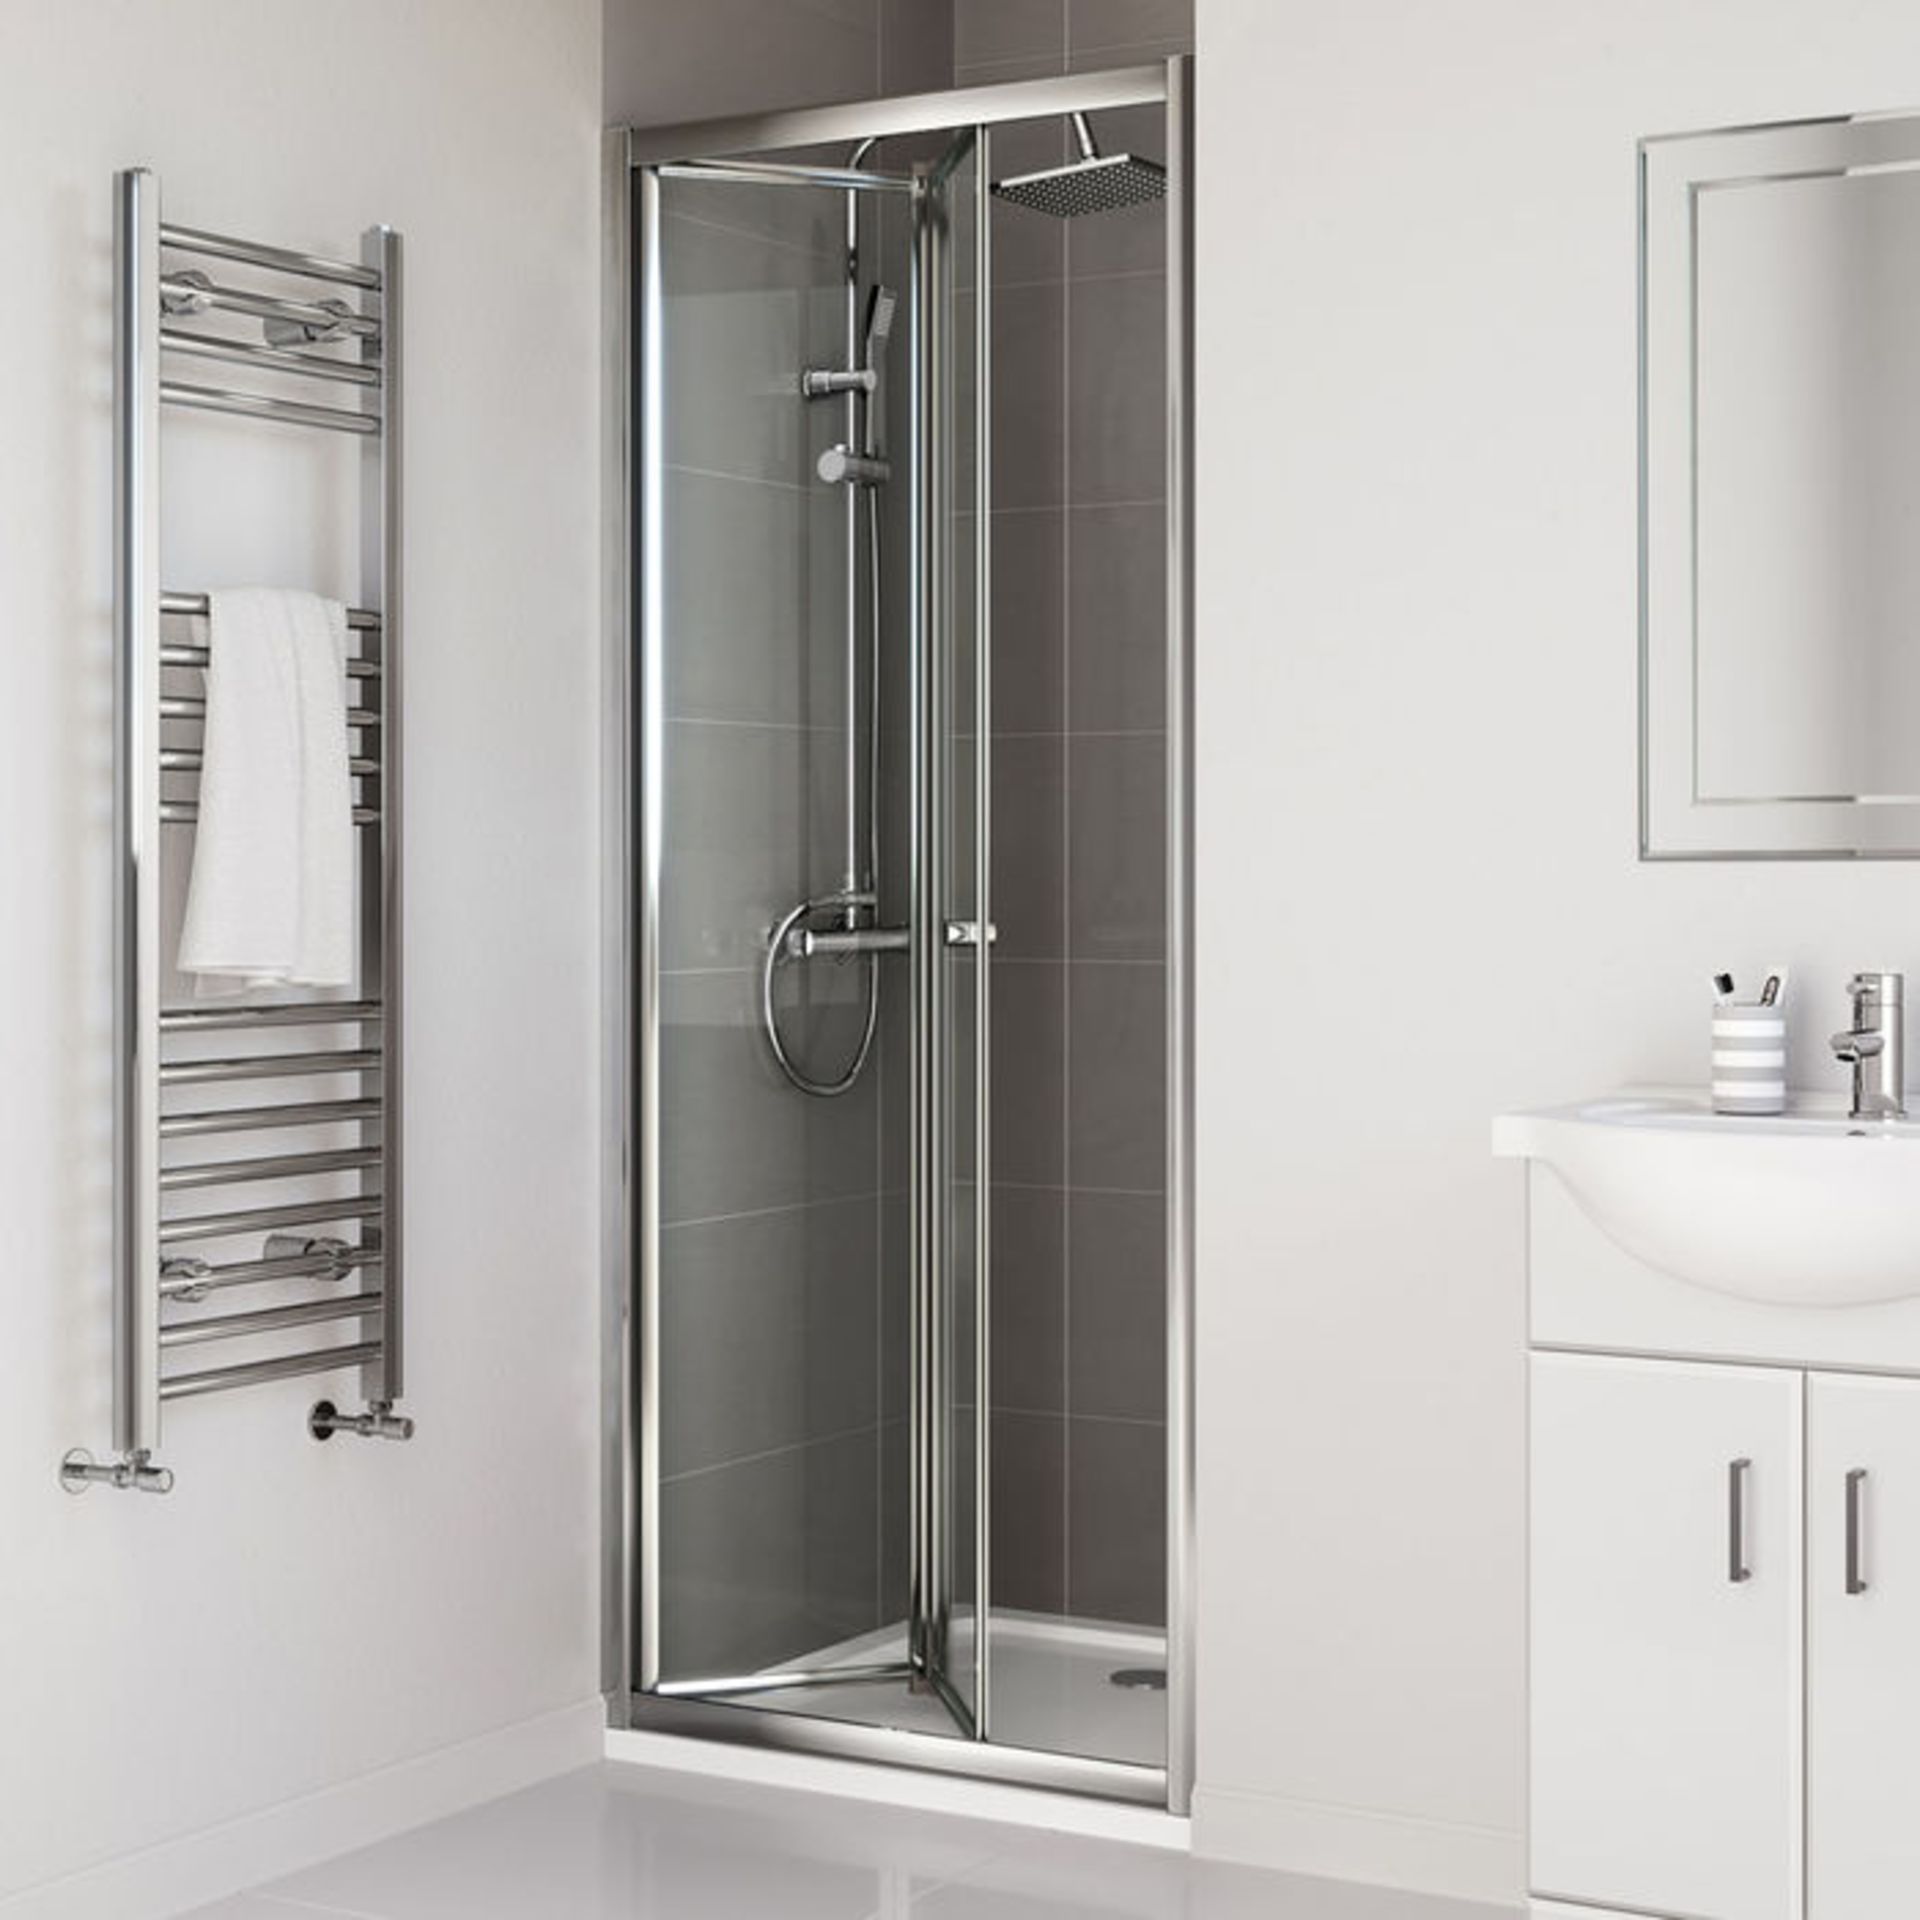 (PO13) 760mm - Elements Bi Fold Shower Door. RRP £299.99.4mm Safety GlassFully waterproof tested - Image 2 of 3